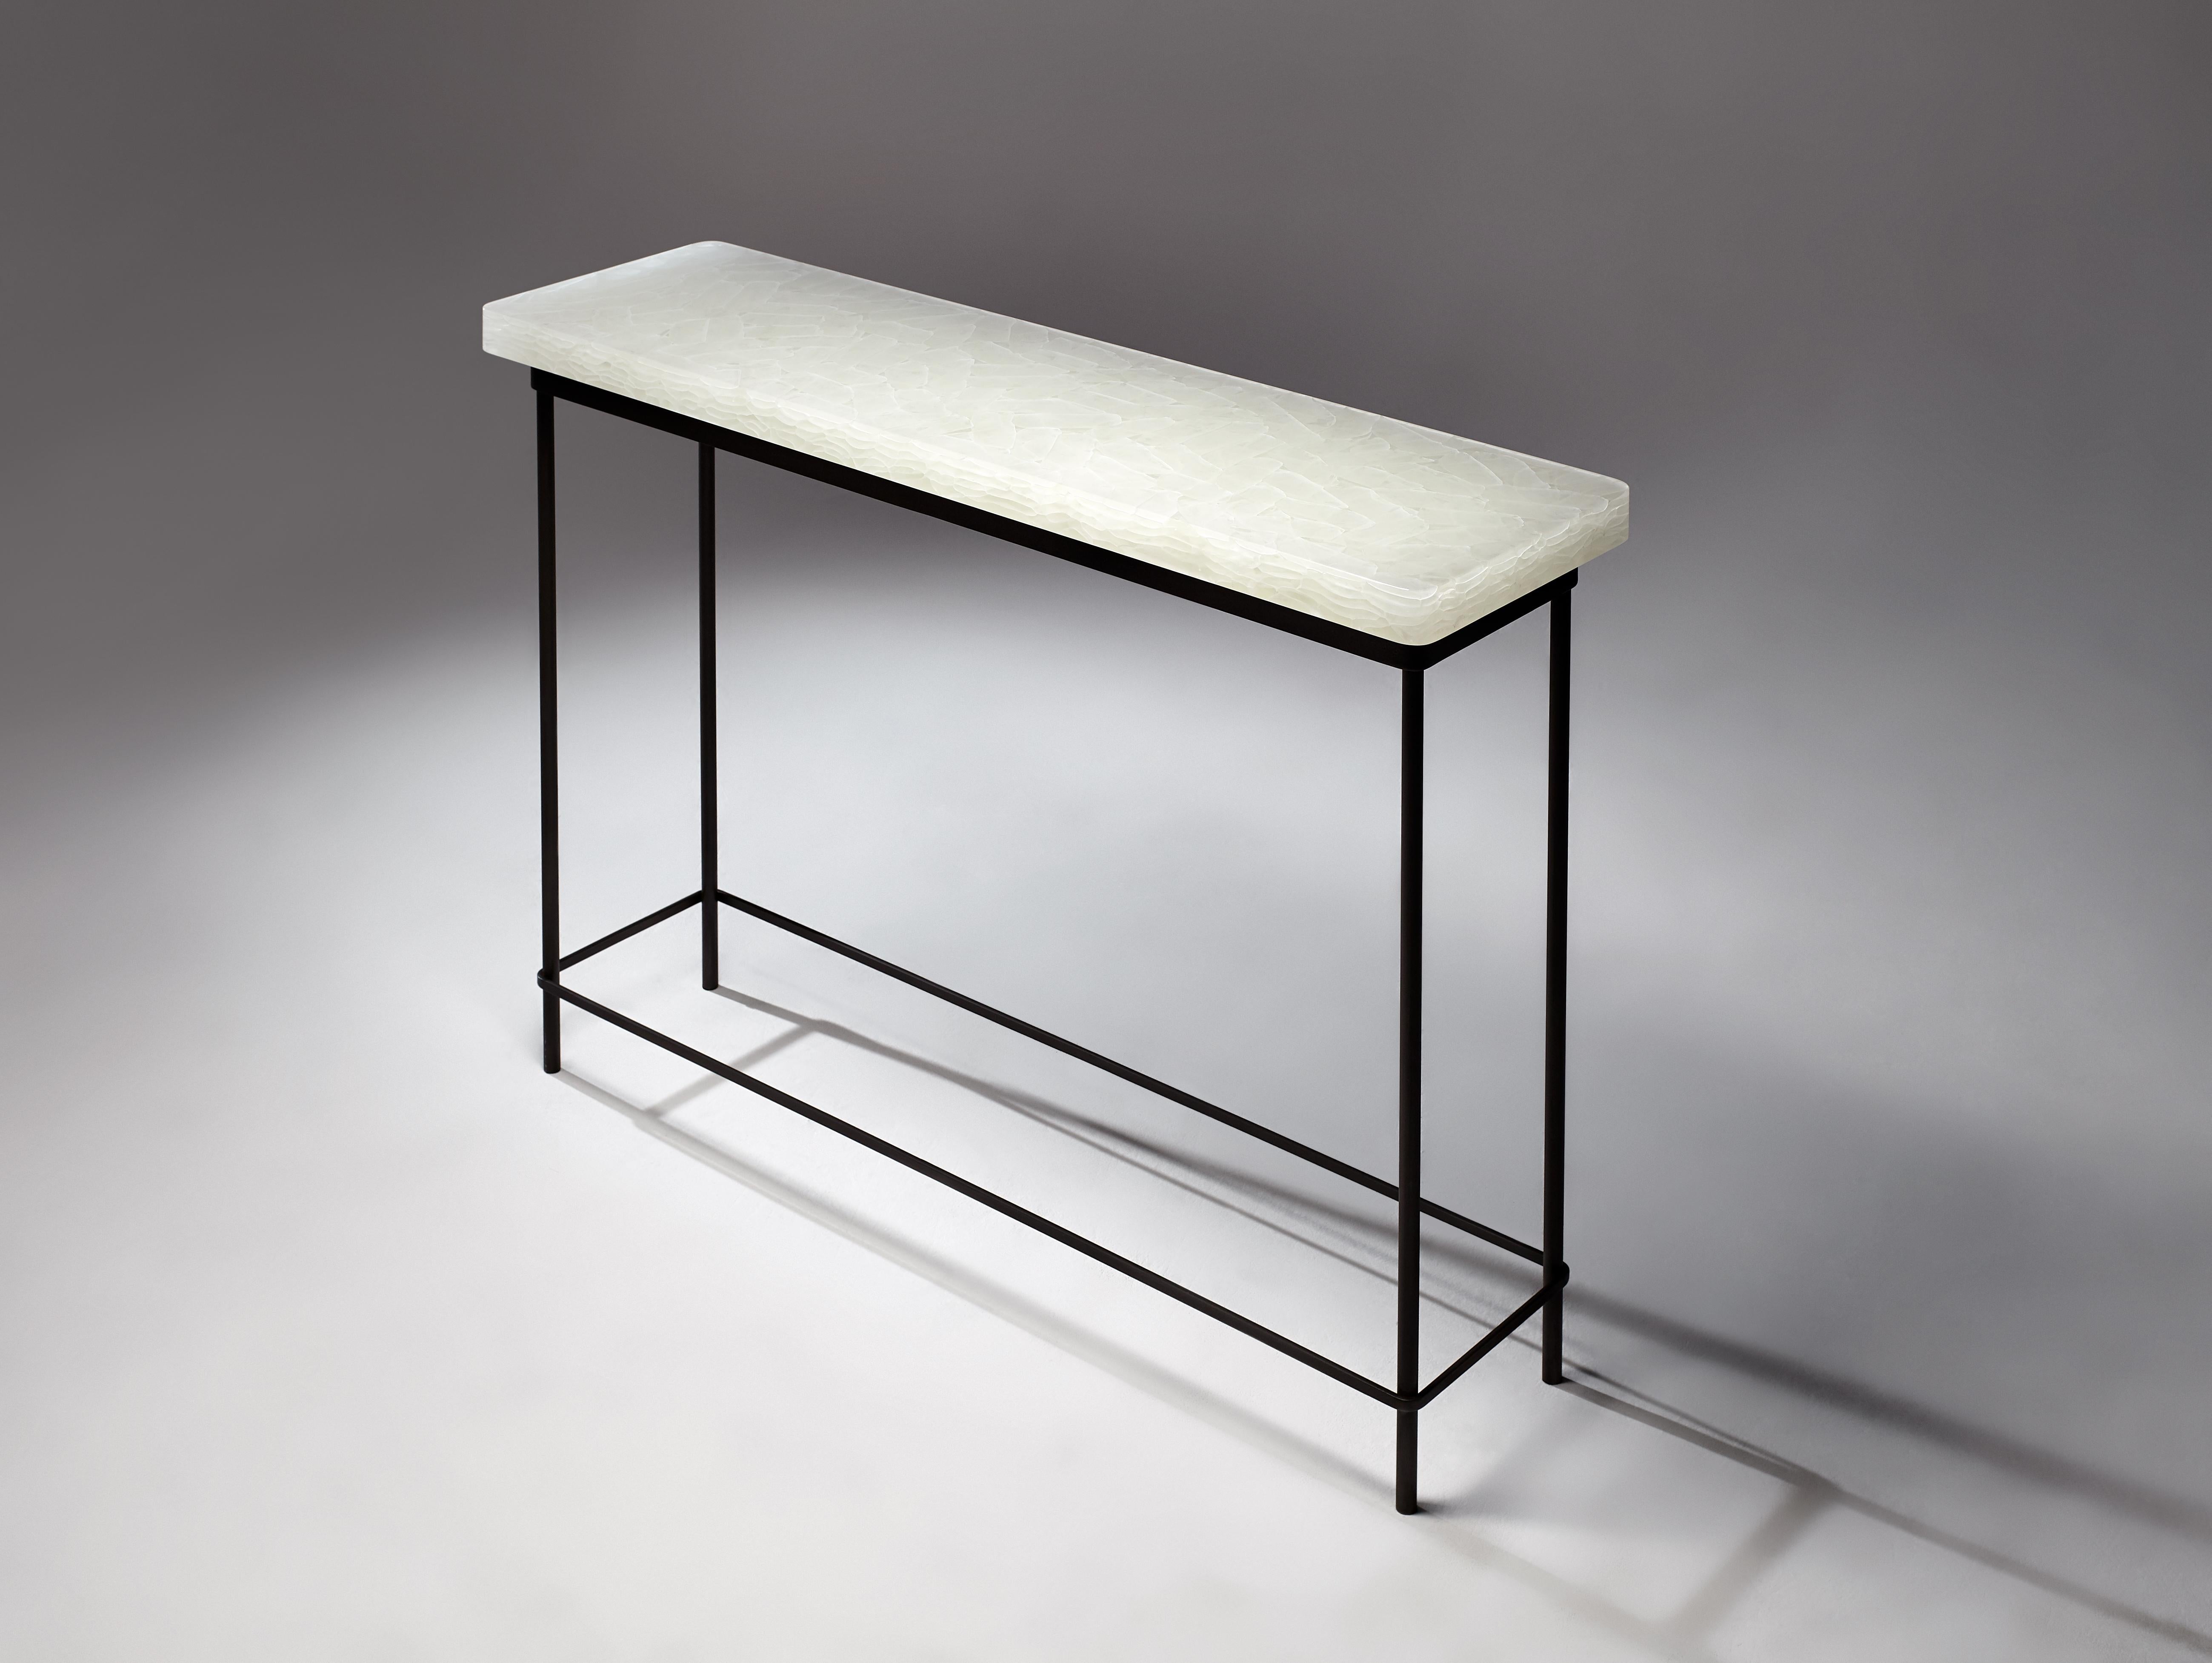 This Console table is hand made and polished in our small studio Toronto, Ontario by talented and seasoned craftspeople. The glass is borosilicate and is the same material found cladding the Baha'i' Temple of South America. The table base is made of